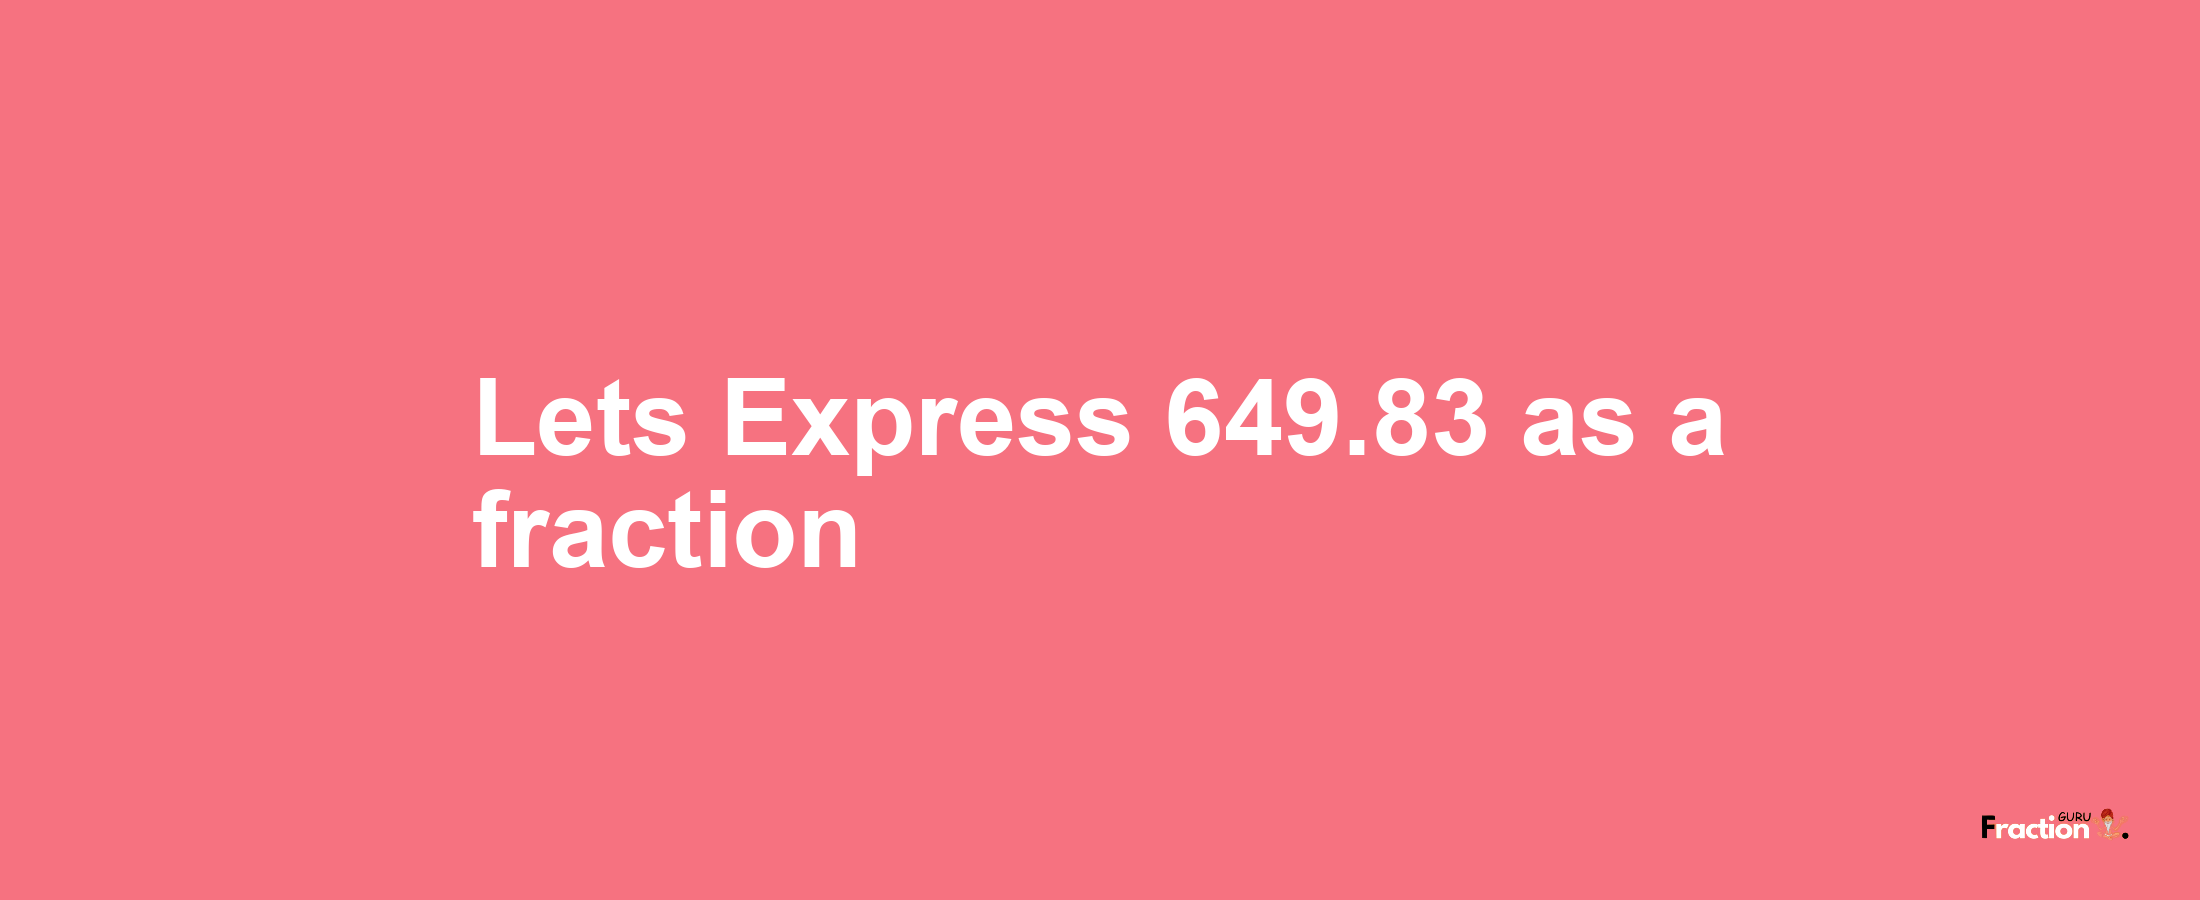 Lets Express 649.83 as afraction